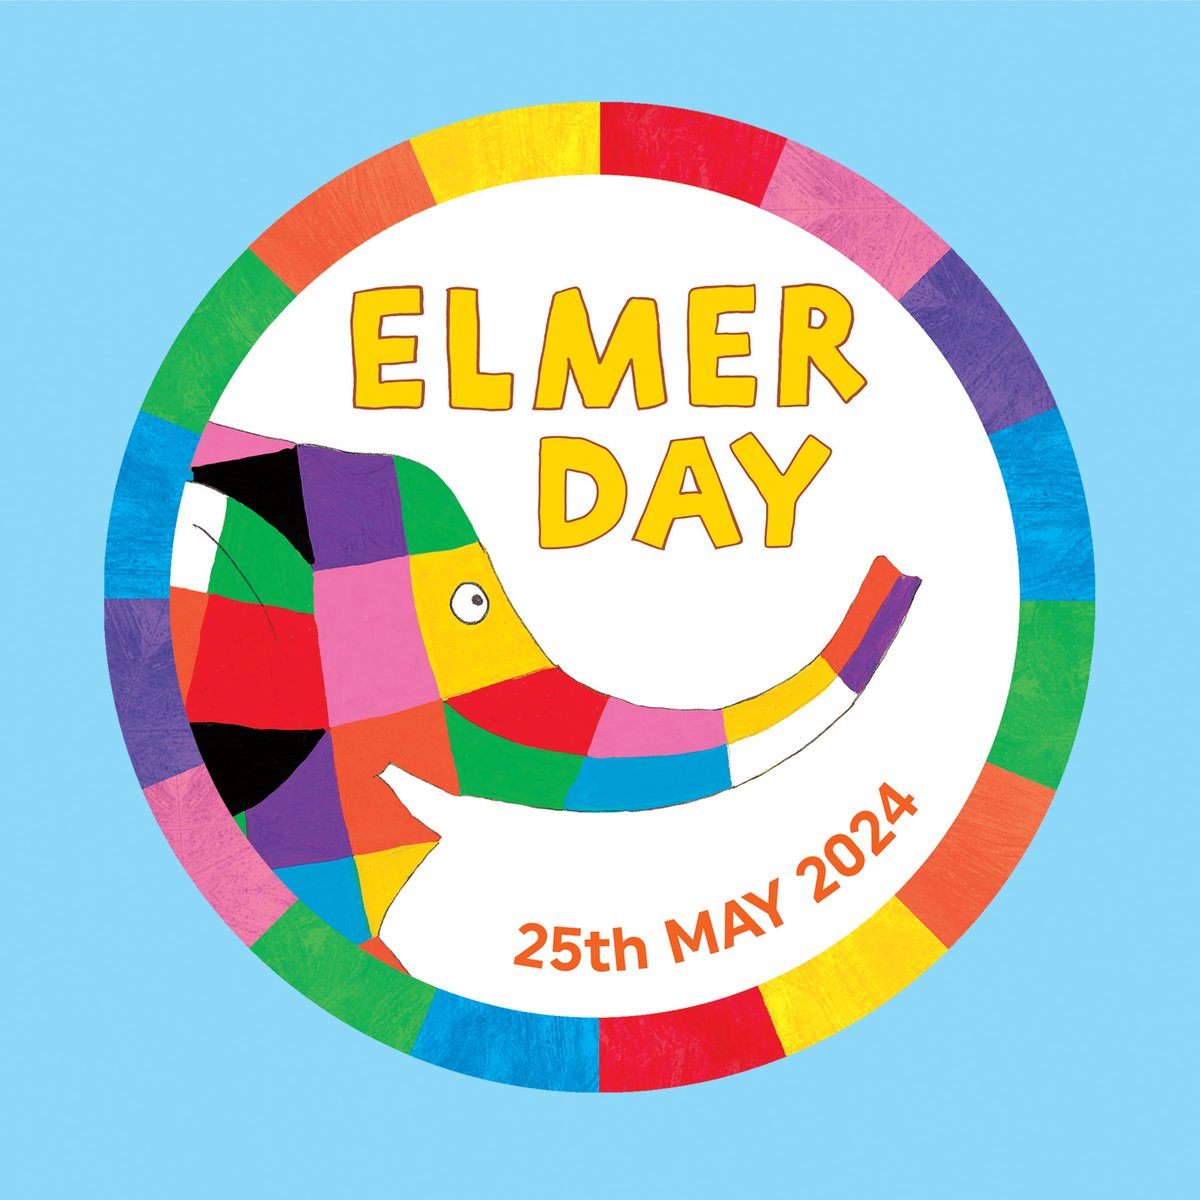 📢Calling all booksellers, librarians and teachers! 📢 Are you ready for #ElmerDay on 25th May? 🌈🐘 Join in the fun by downloading the FREE resources here: elmer.co.uk/elmer-day/